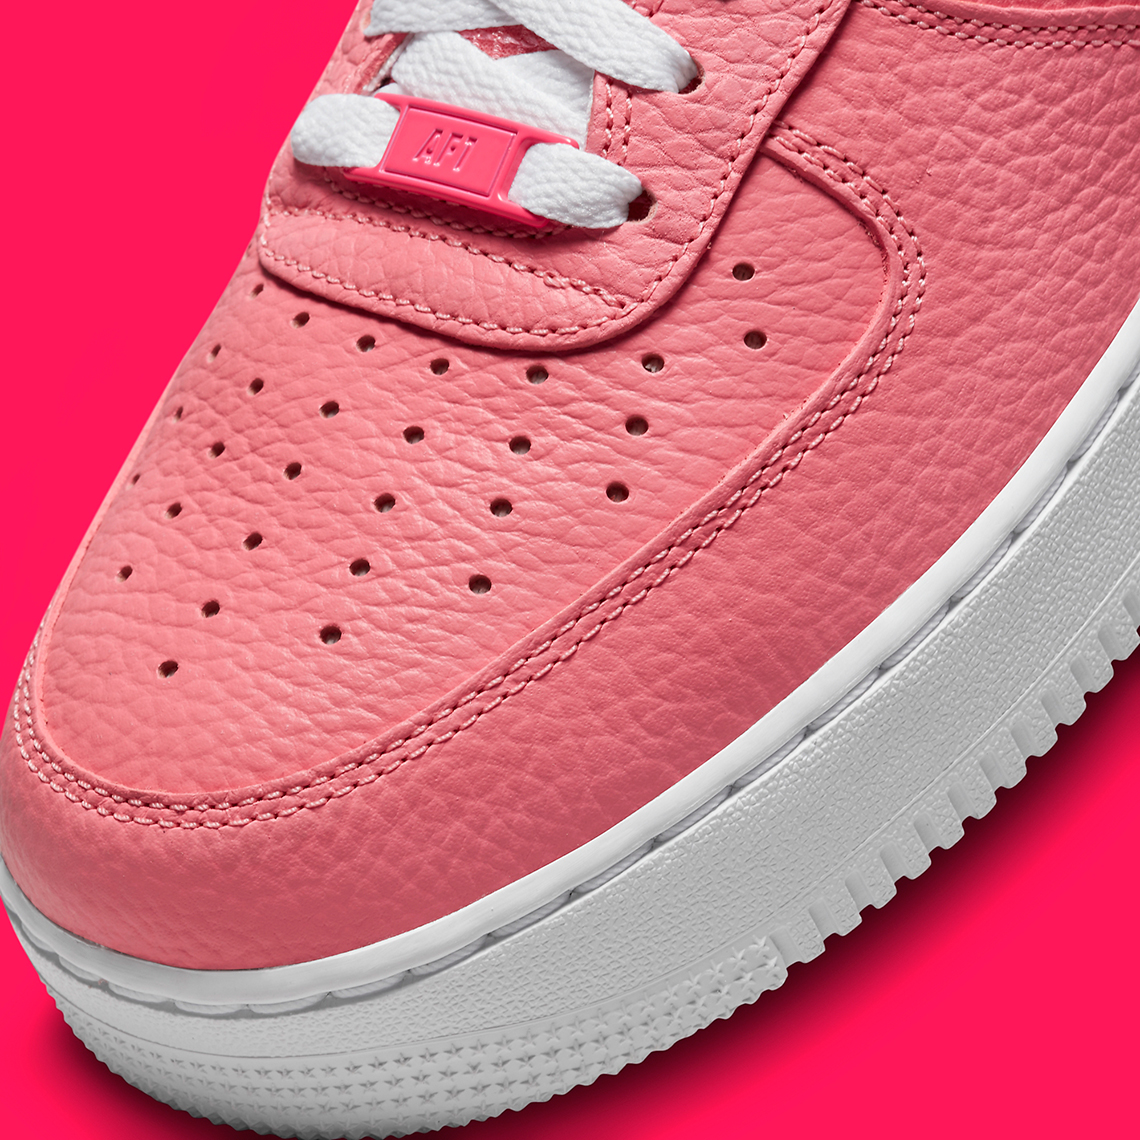 nike naive air force 1 low pink tumbled leather DZ4861 600 7